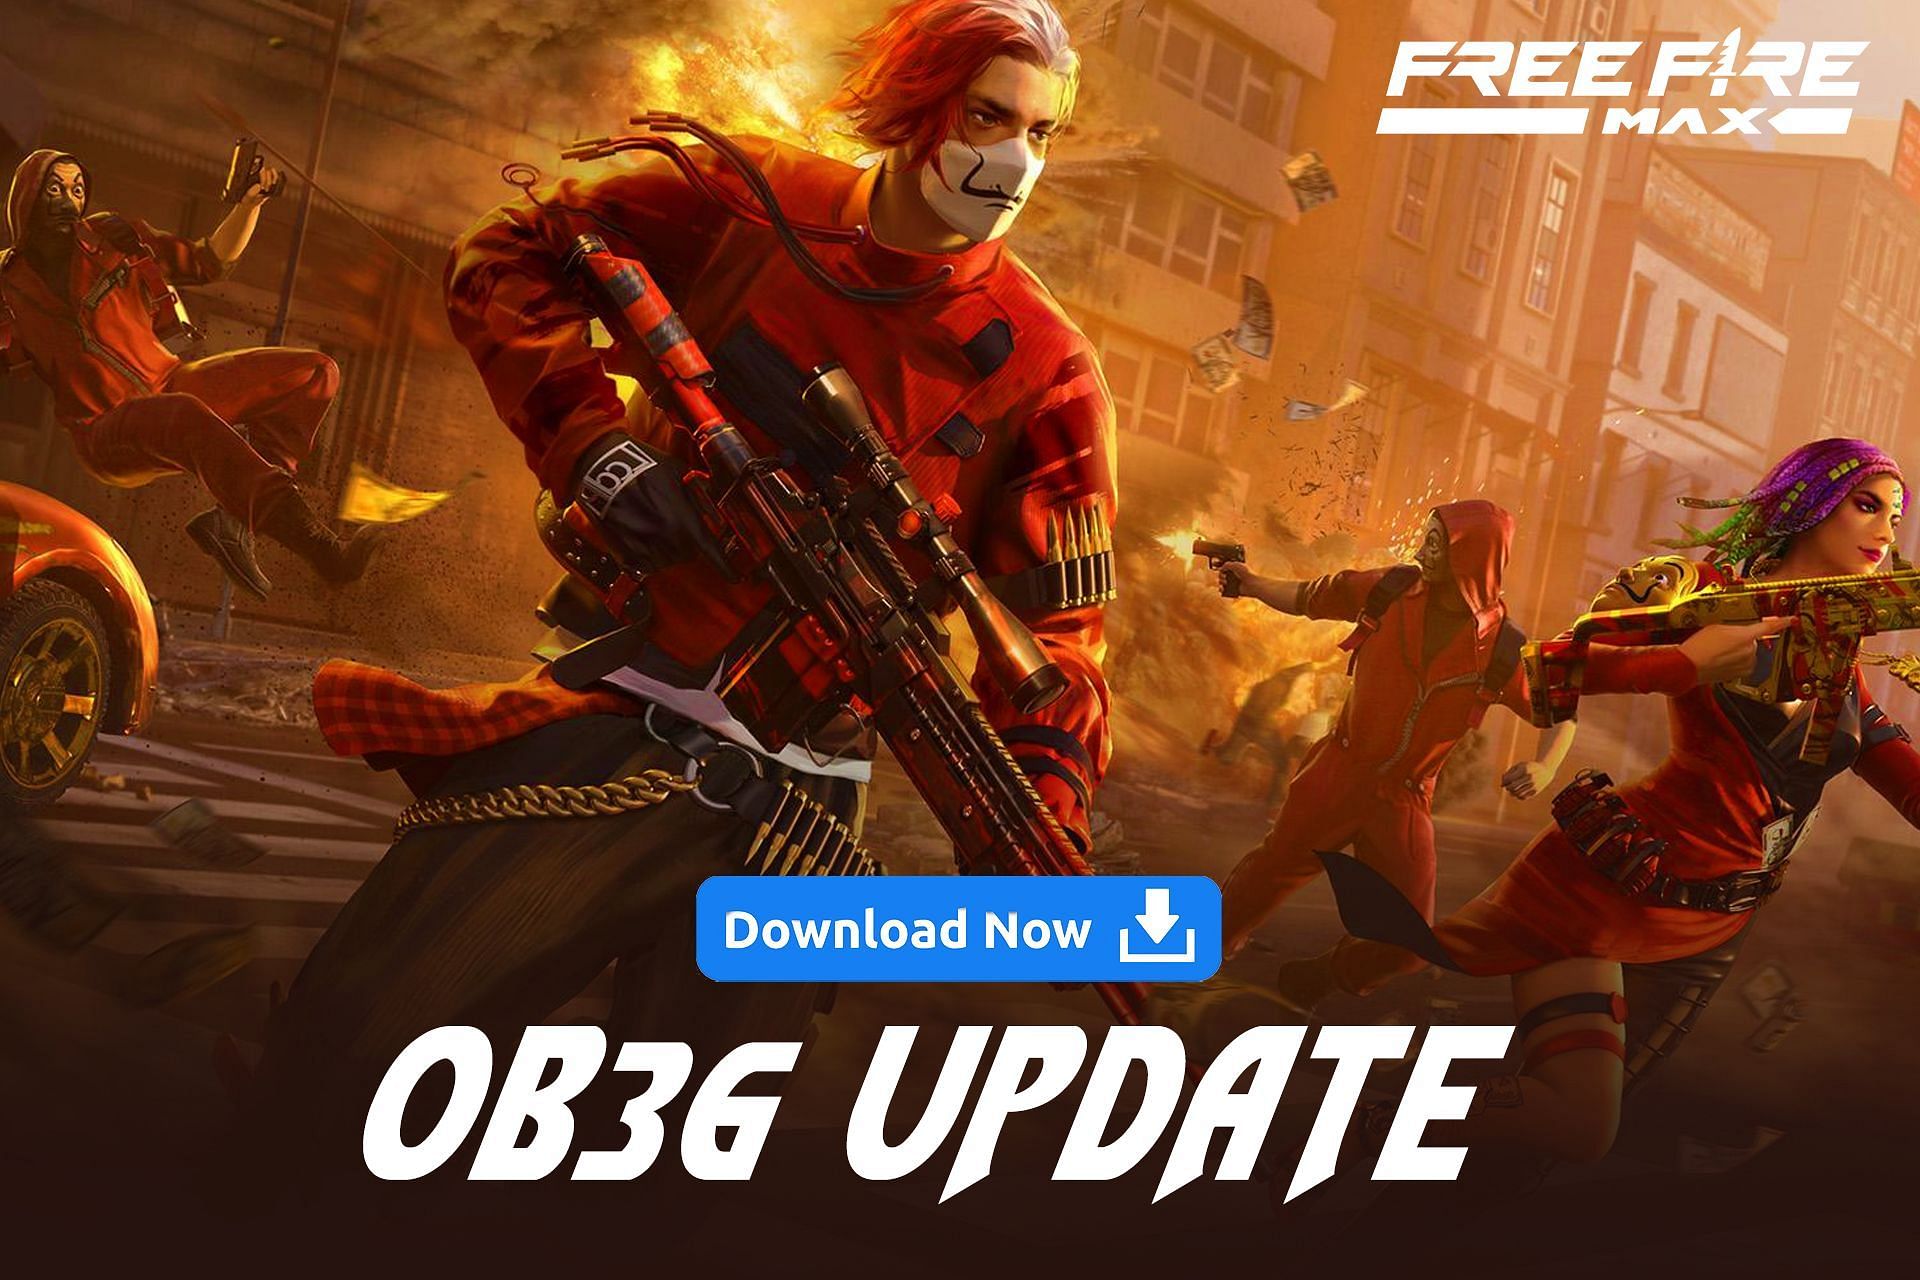 Free Fire MAX OB36 update download link for Indian players: Step-by-step guide